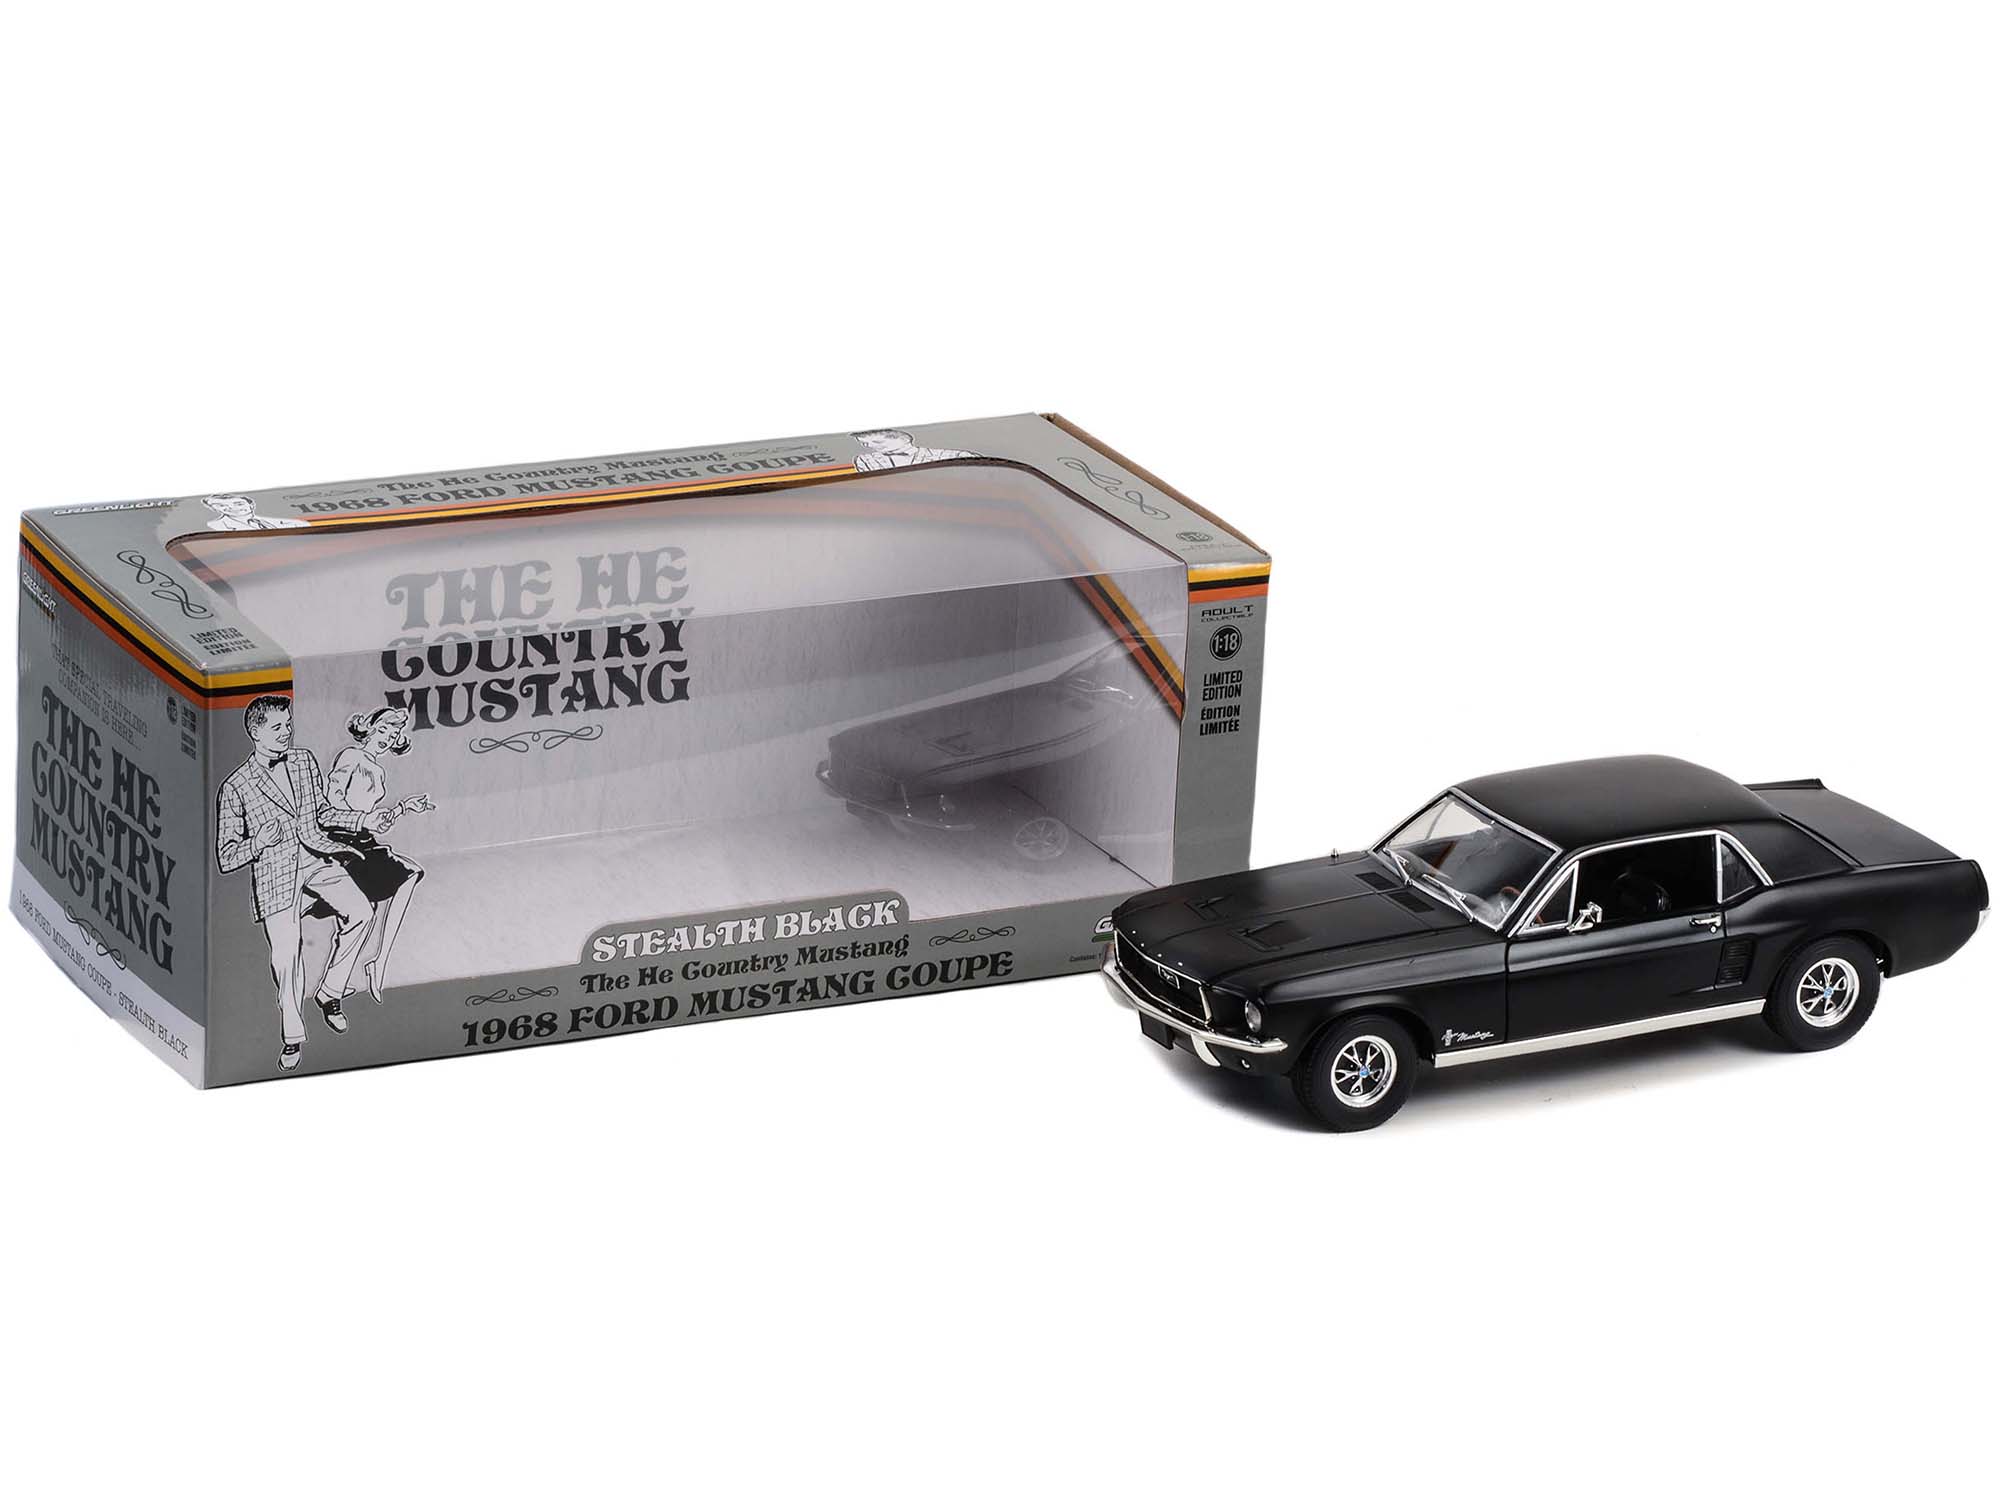 1968 Ford Mustang Coupe Stealth Black "He Country Special - Bill Goodro Ford Denver Colorado" 1/18 Diecast Car Model by Greenlight